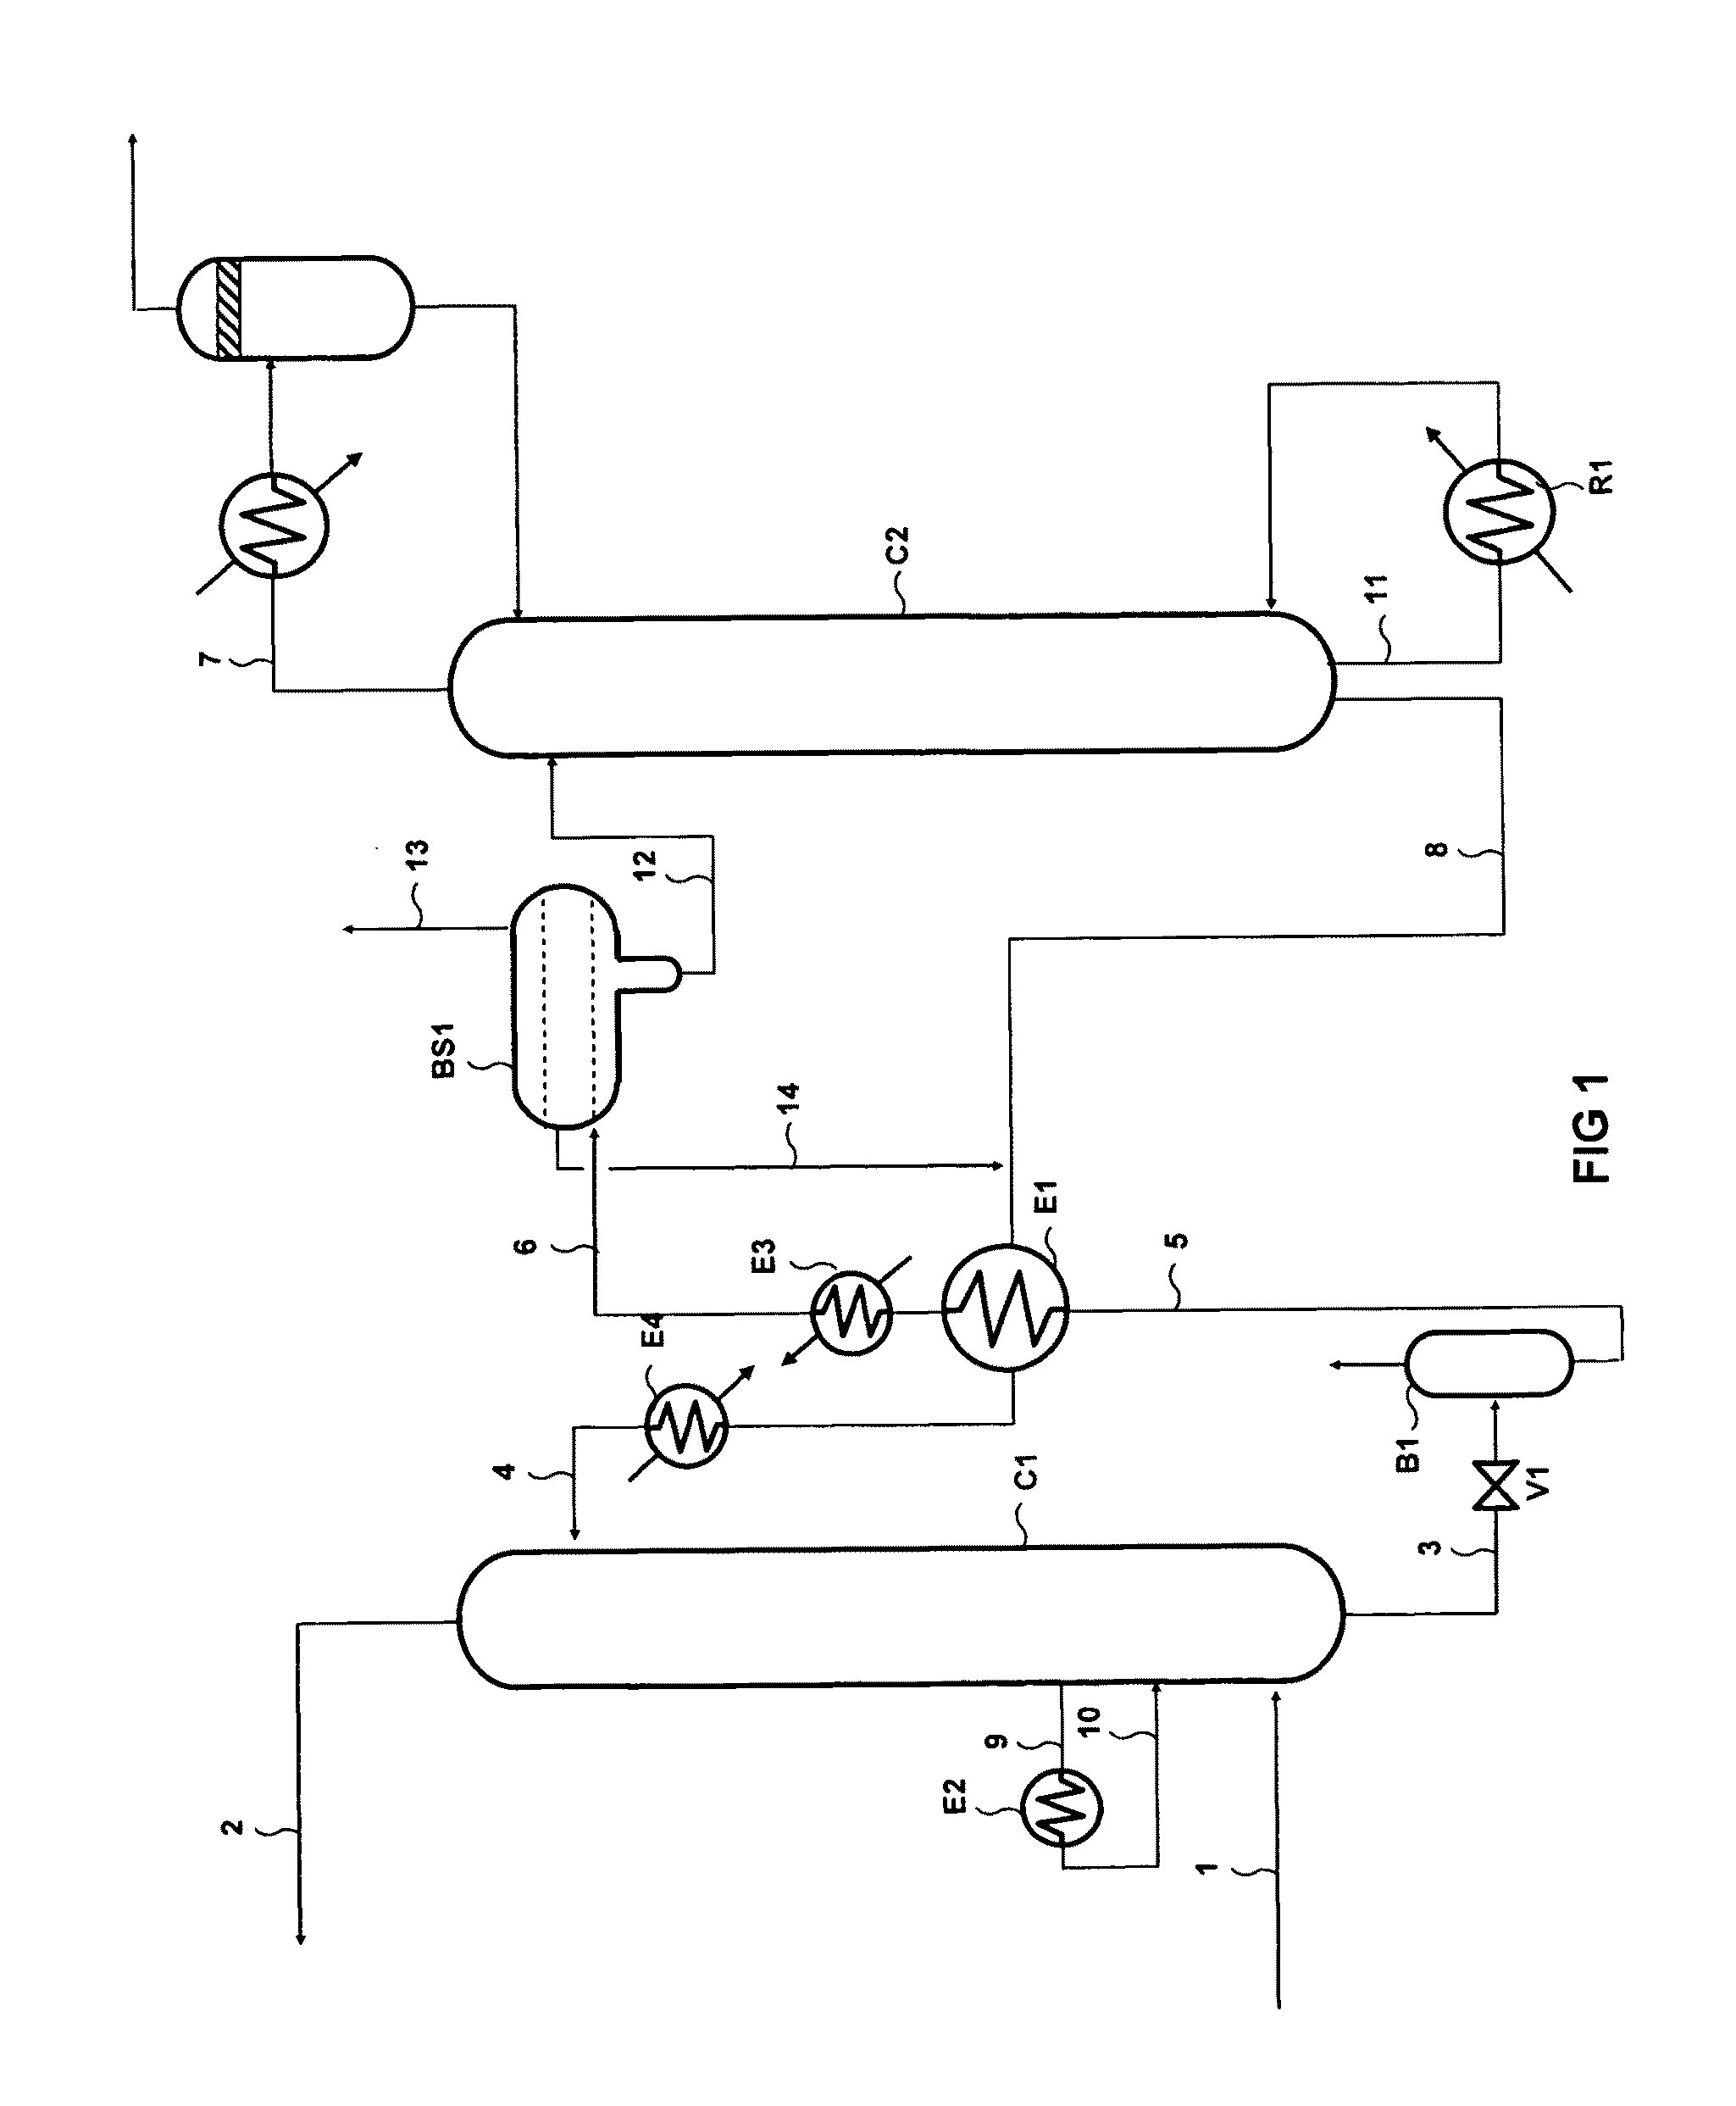 Gas deacidizing method using an absorbent solution with demixing control